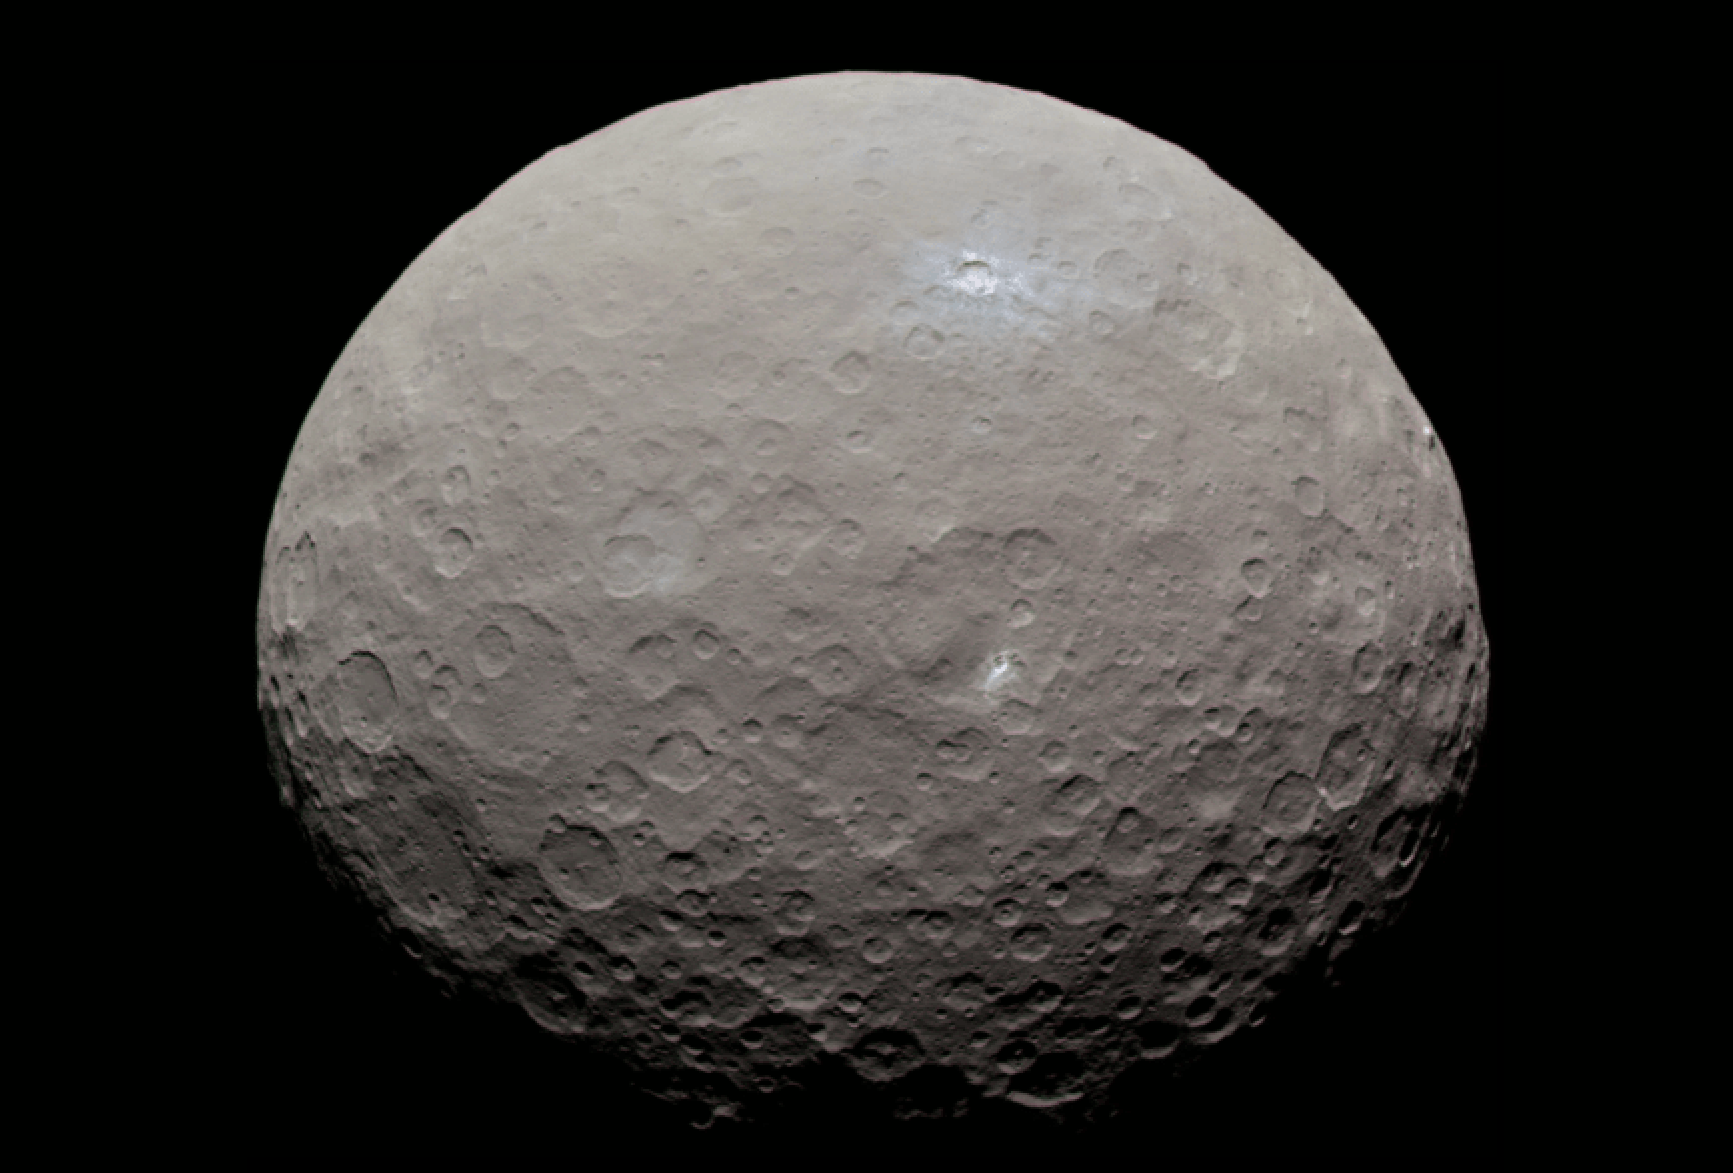 Bacterial Utilisation Of Aliphatic Organics: Is the Dwarf Planet Ceres Habitable?